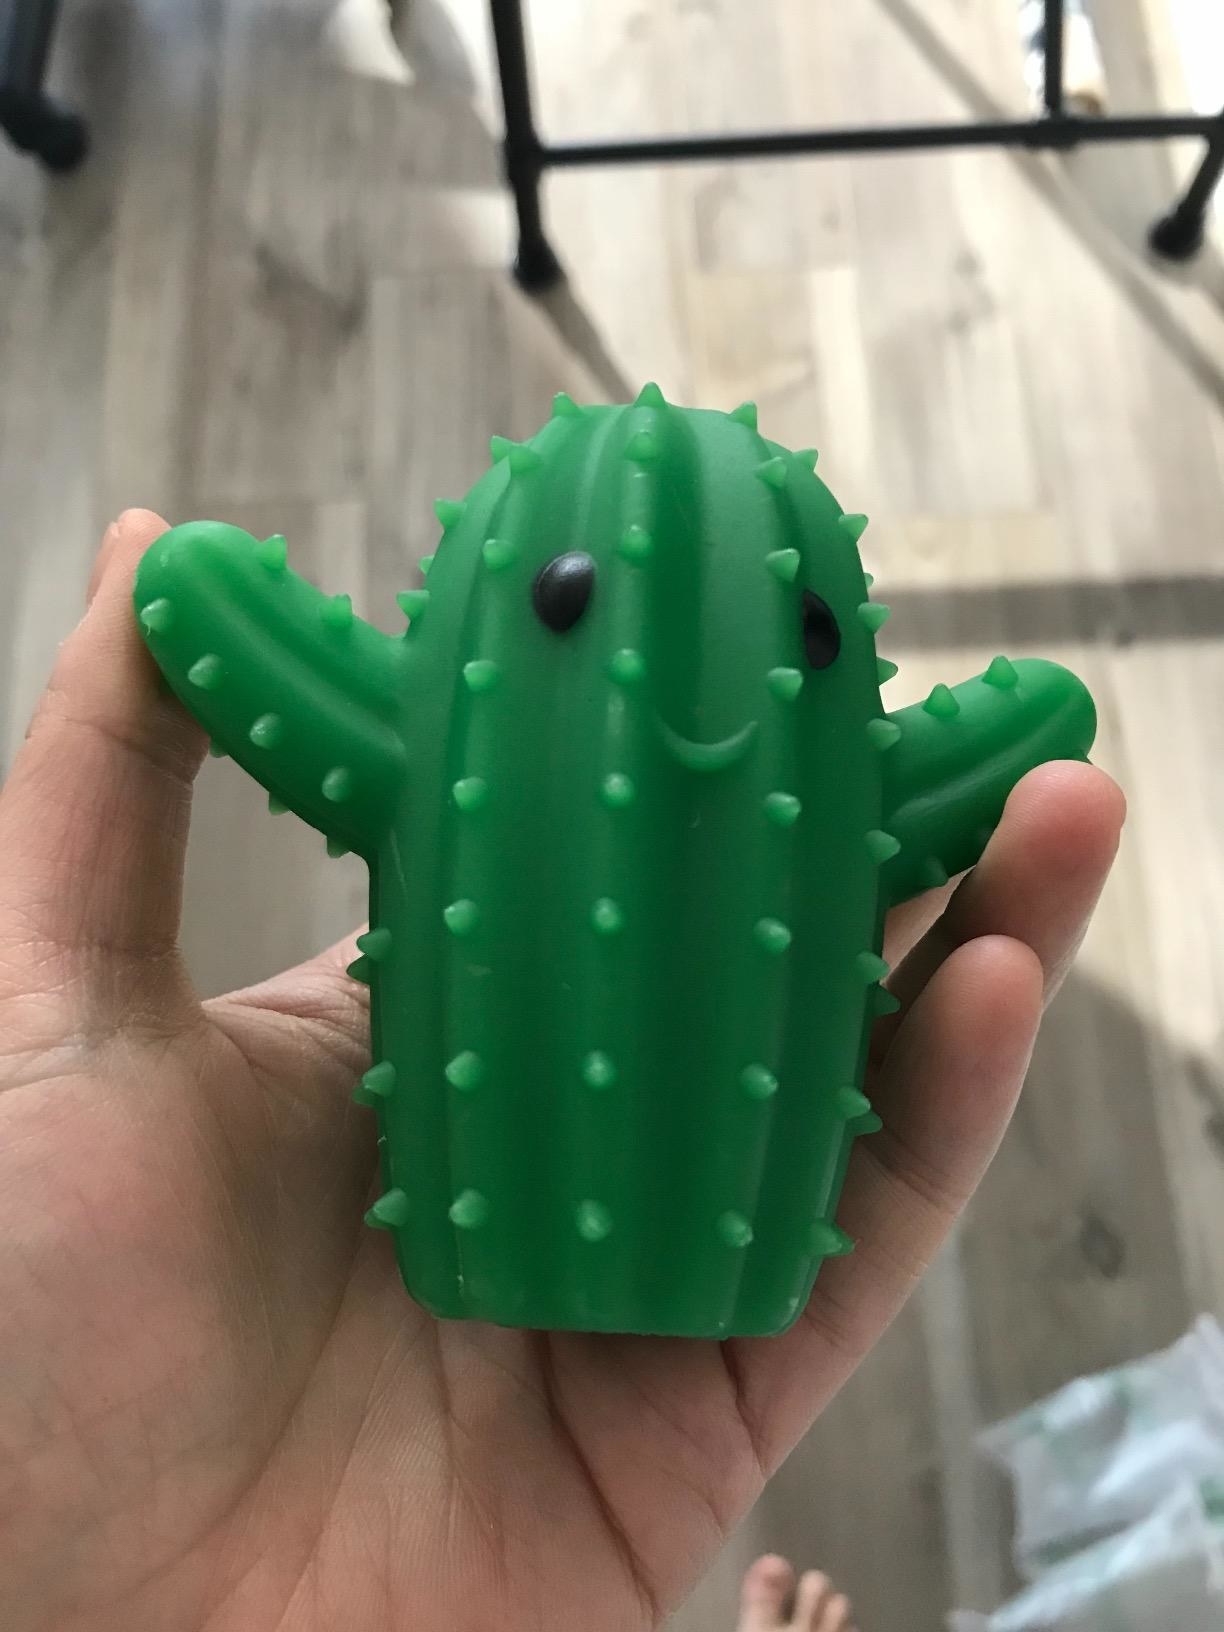 Reviewer holding the green dryer ball shaped like a cactus